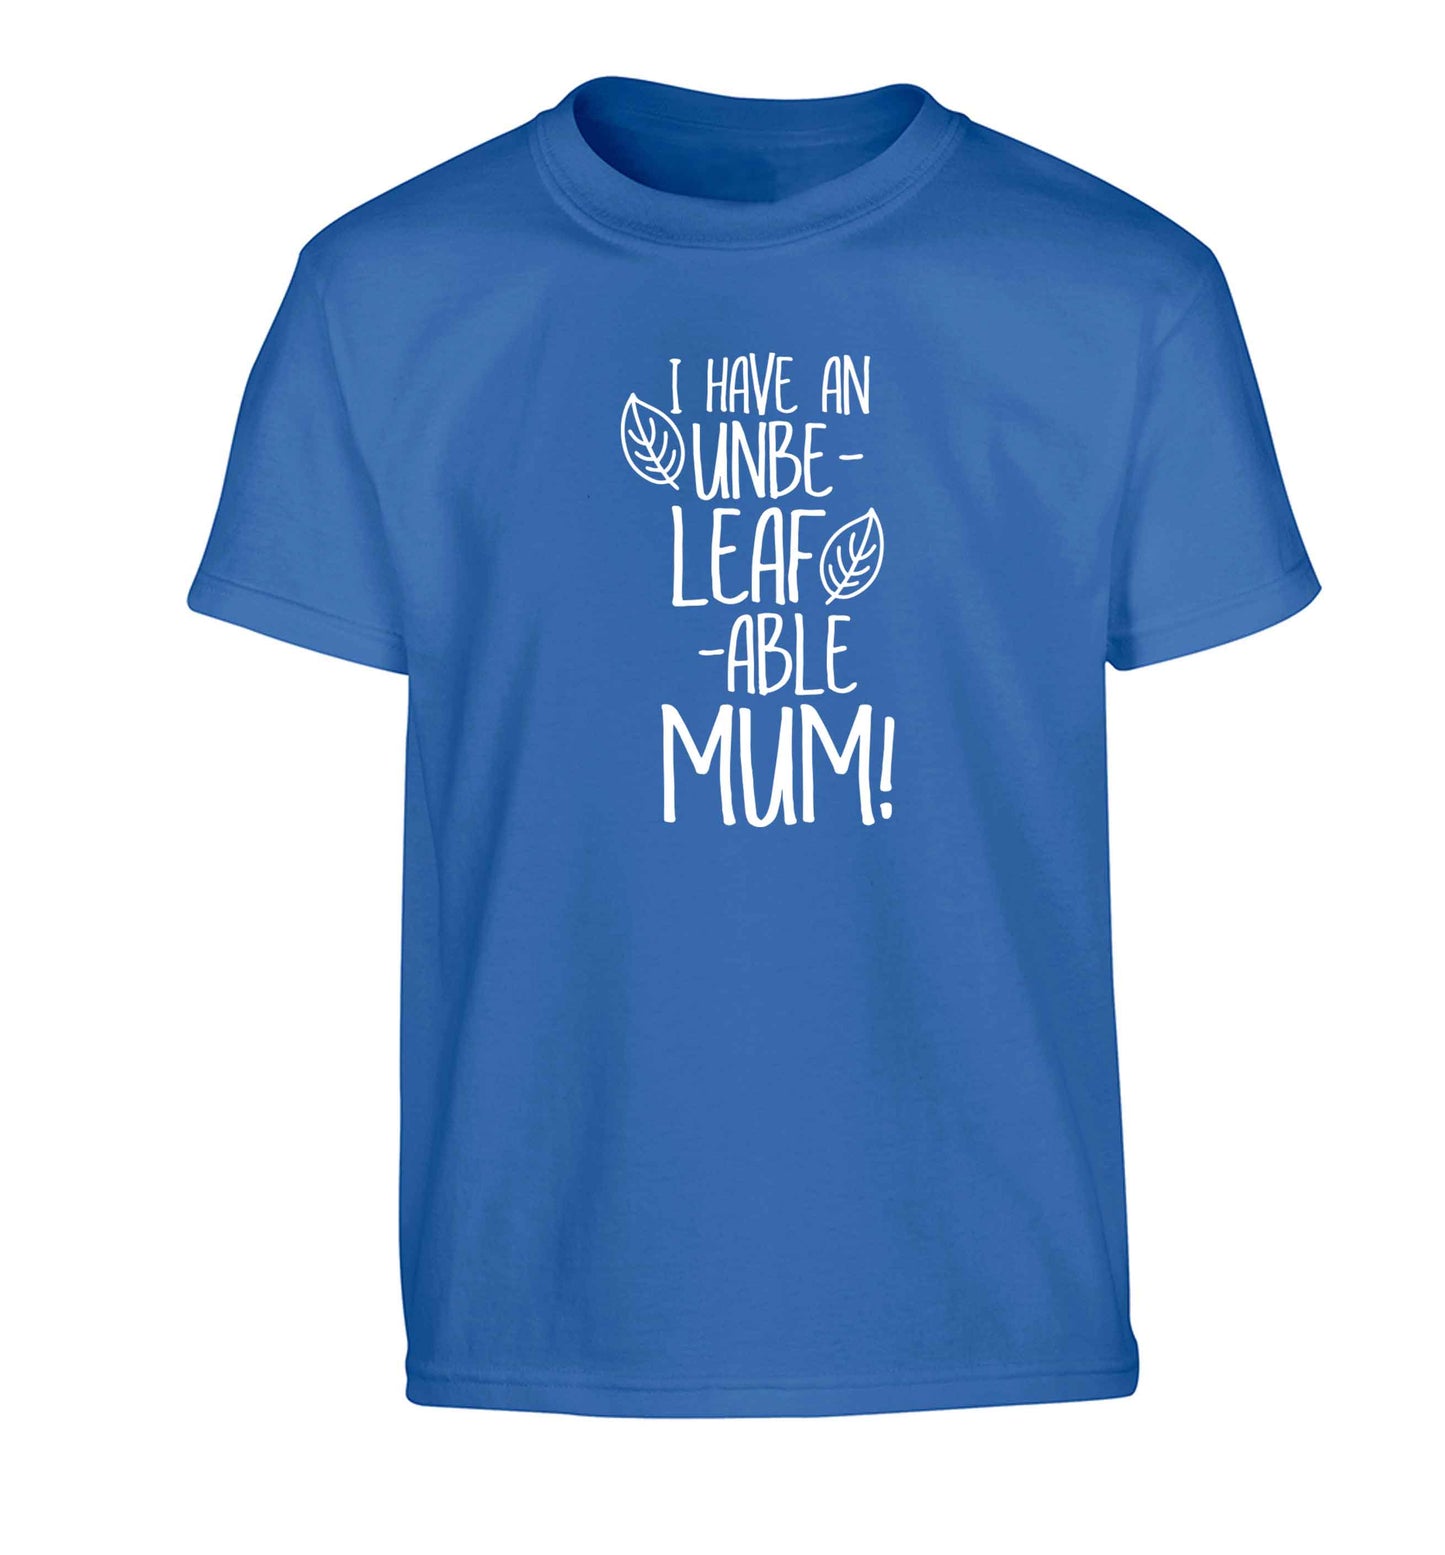 I have an unbeleafable mum! Children's blue Tshirt 12-13 Years